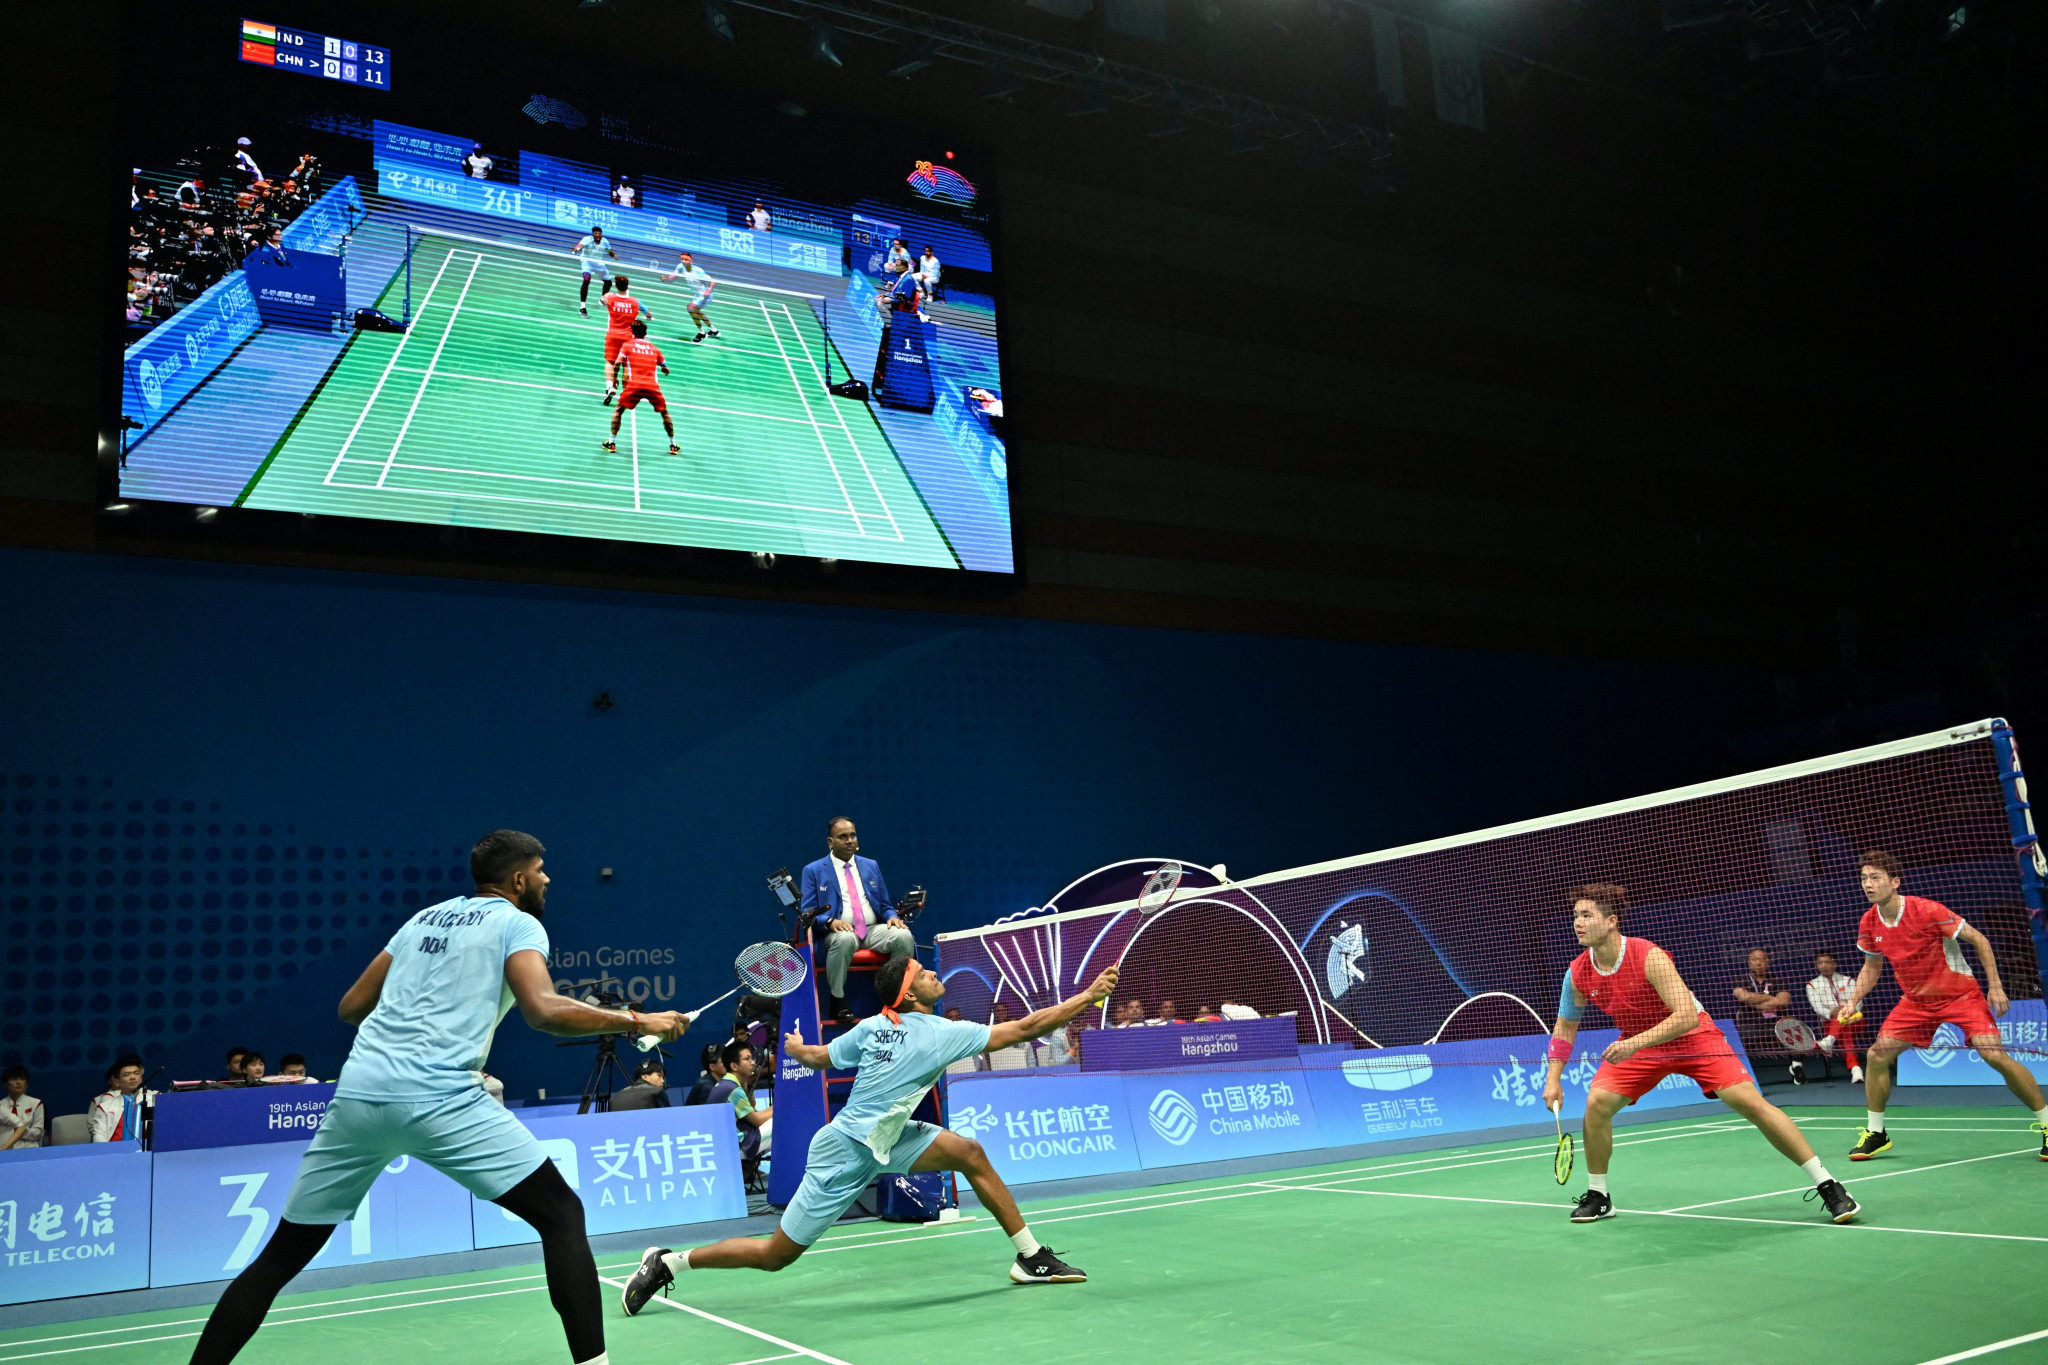 India let slip a 2-0 lead to lose 3-2 to China in the men's team badminton final ©Getty Images